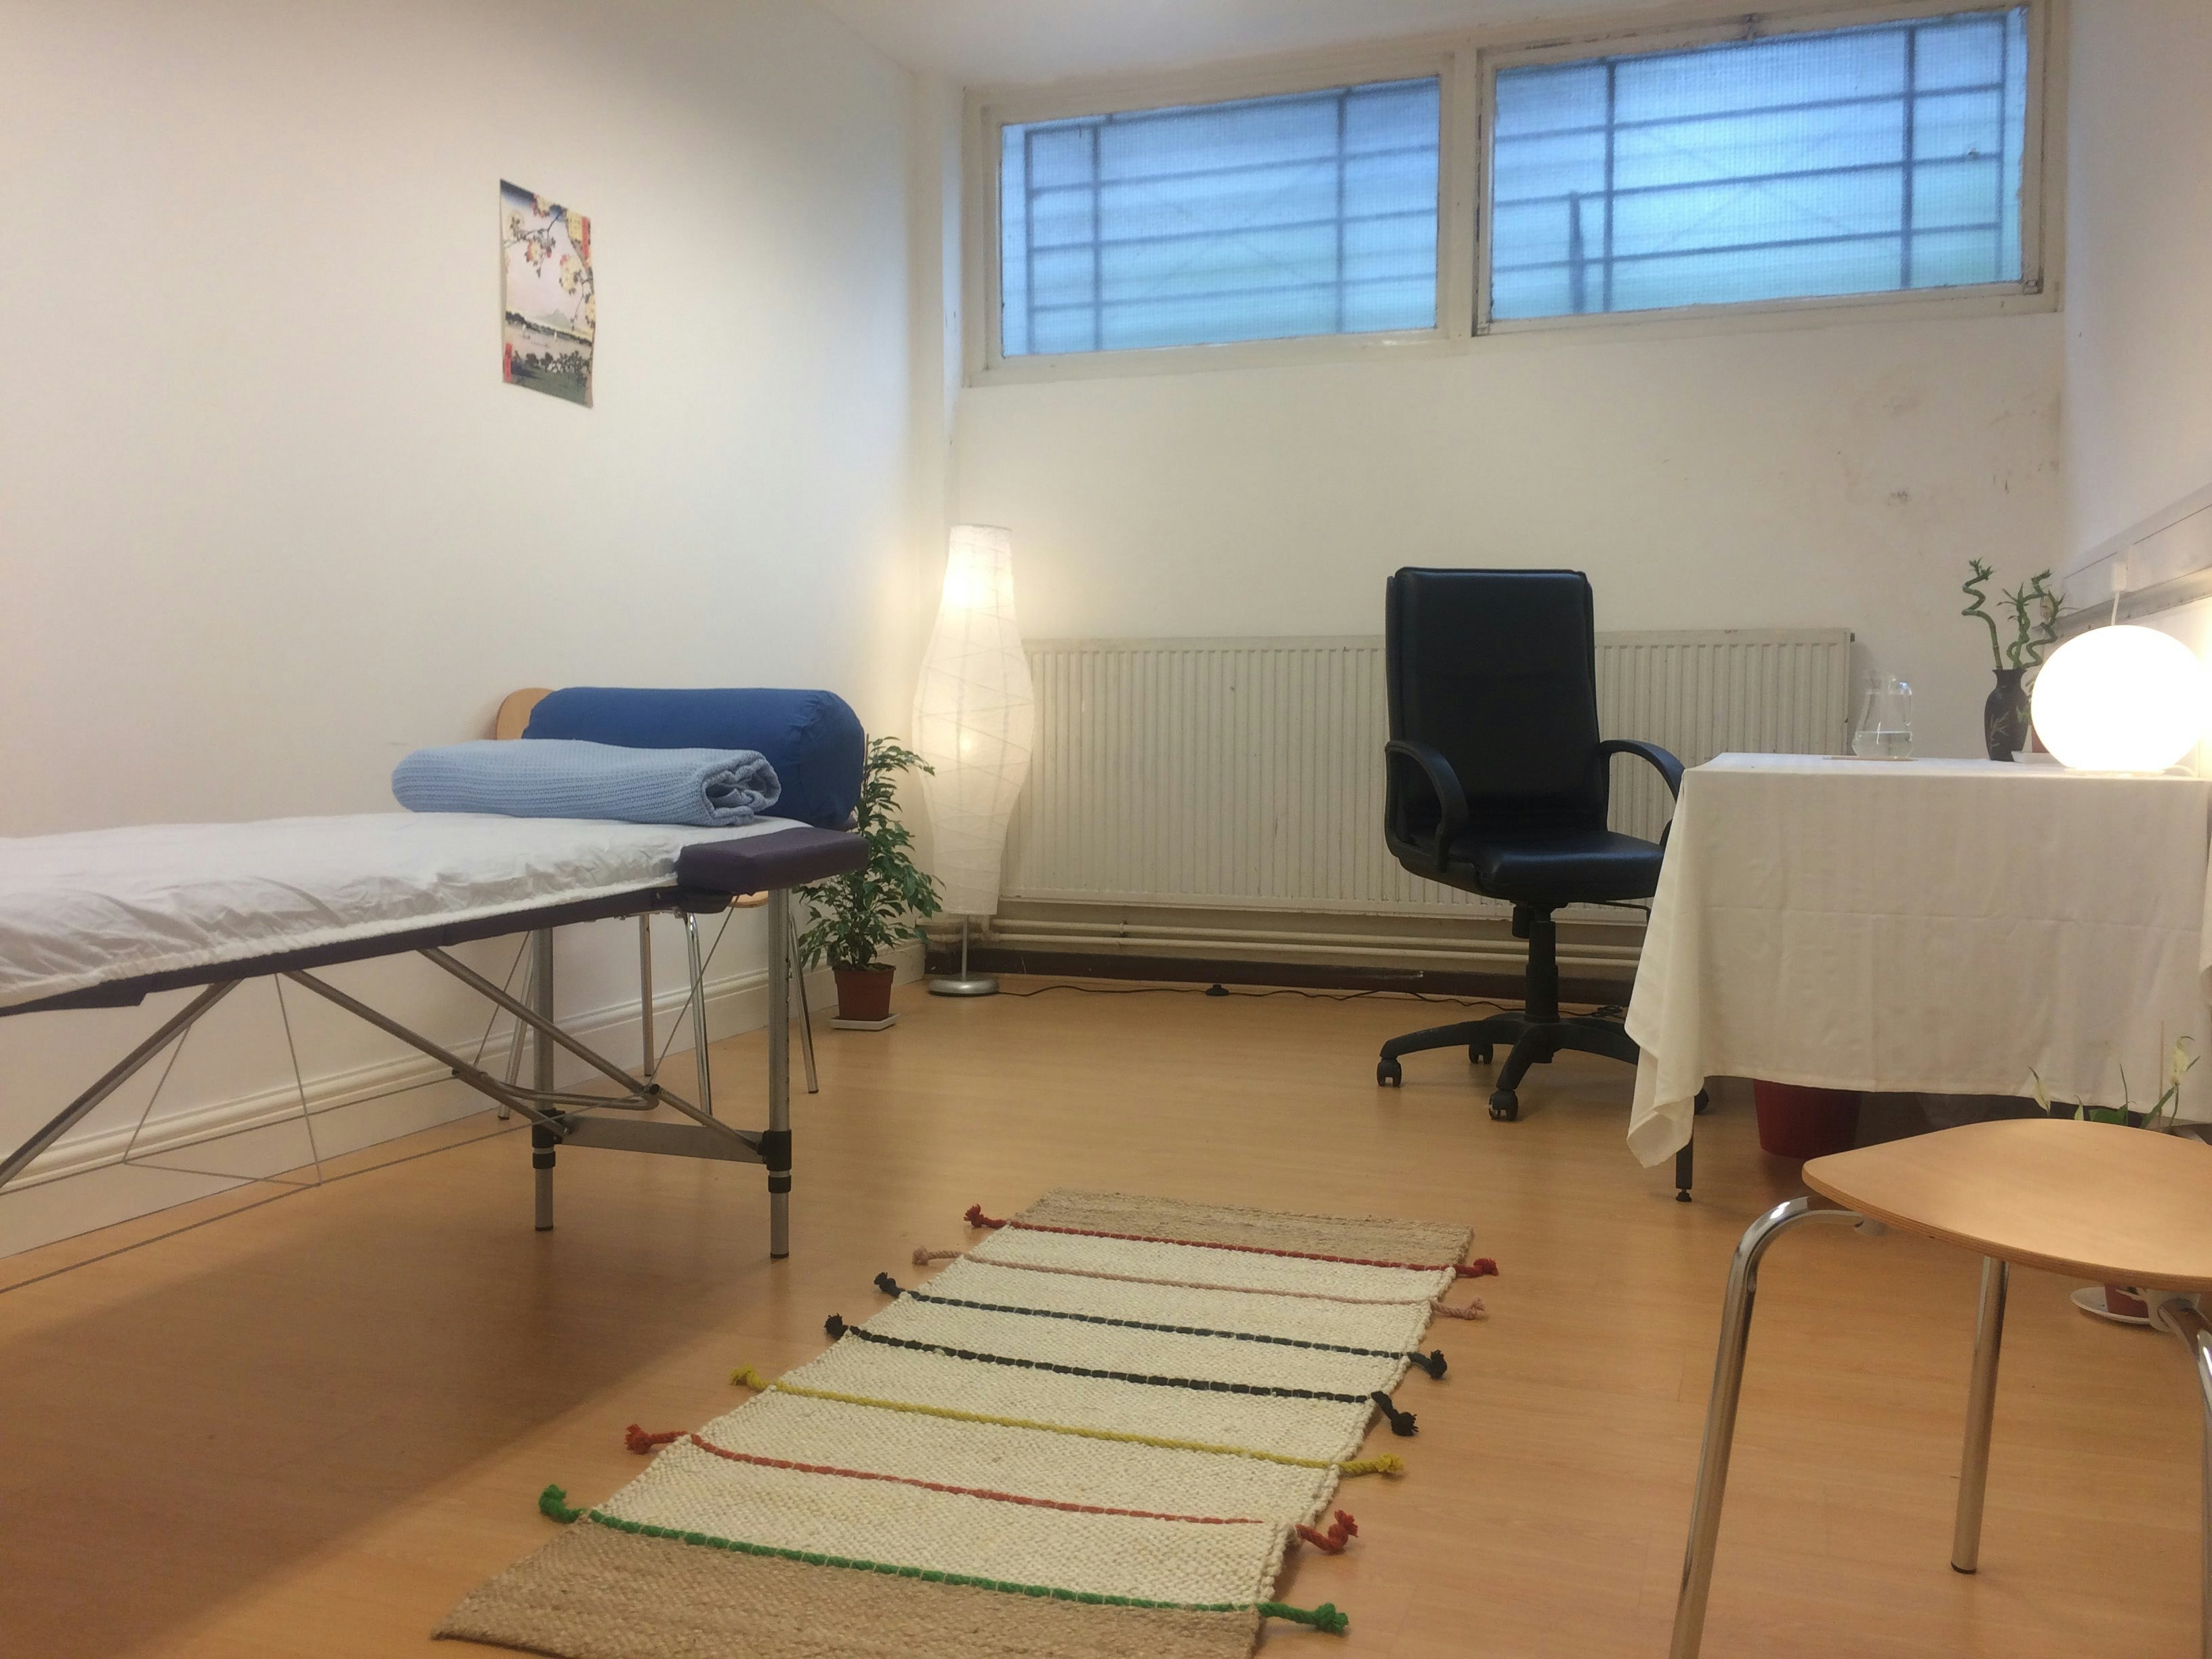 Therapy Rooms Venues in London - Centre 151